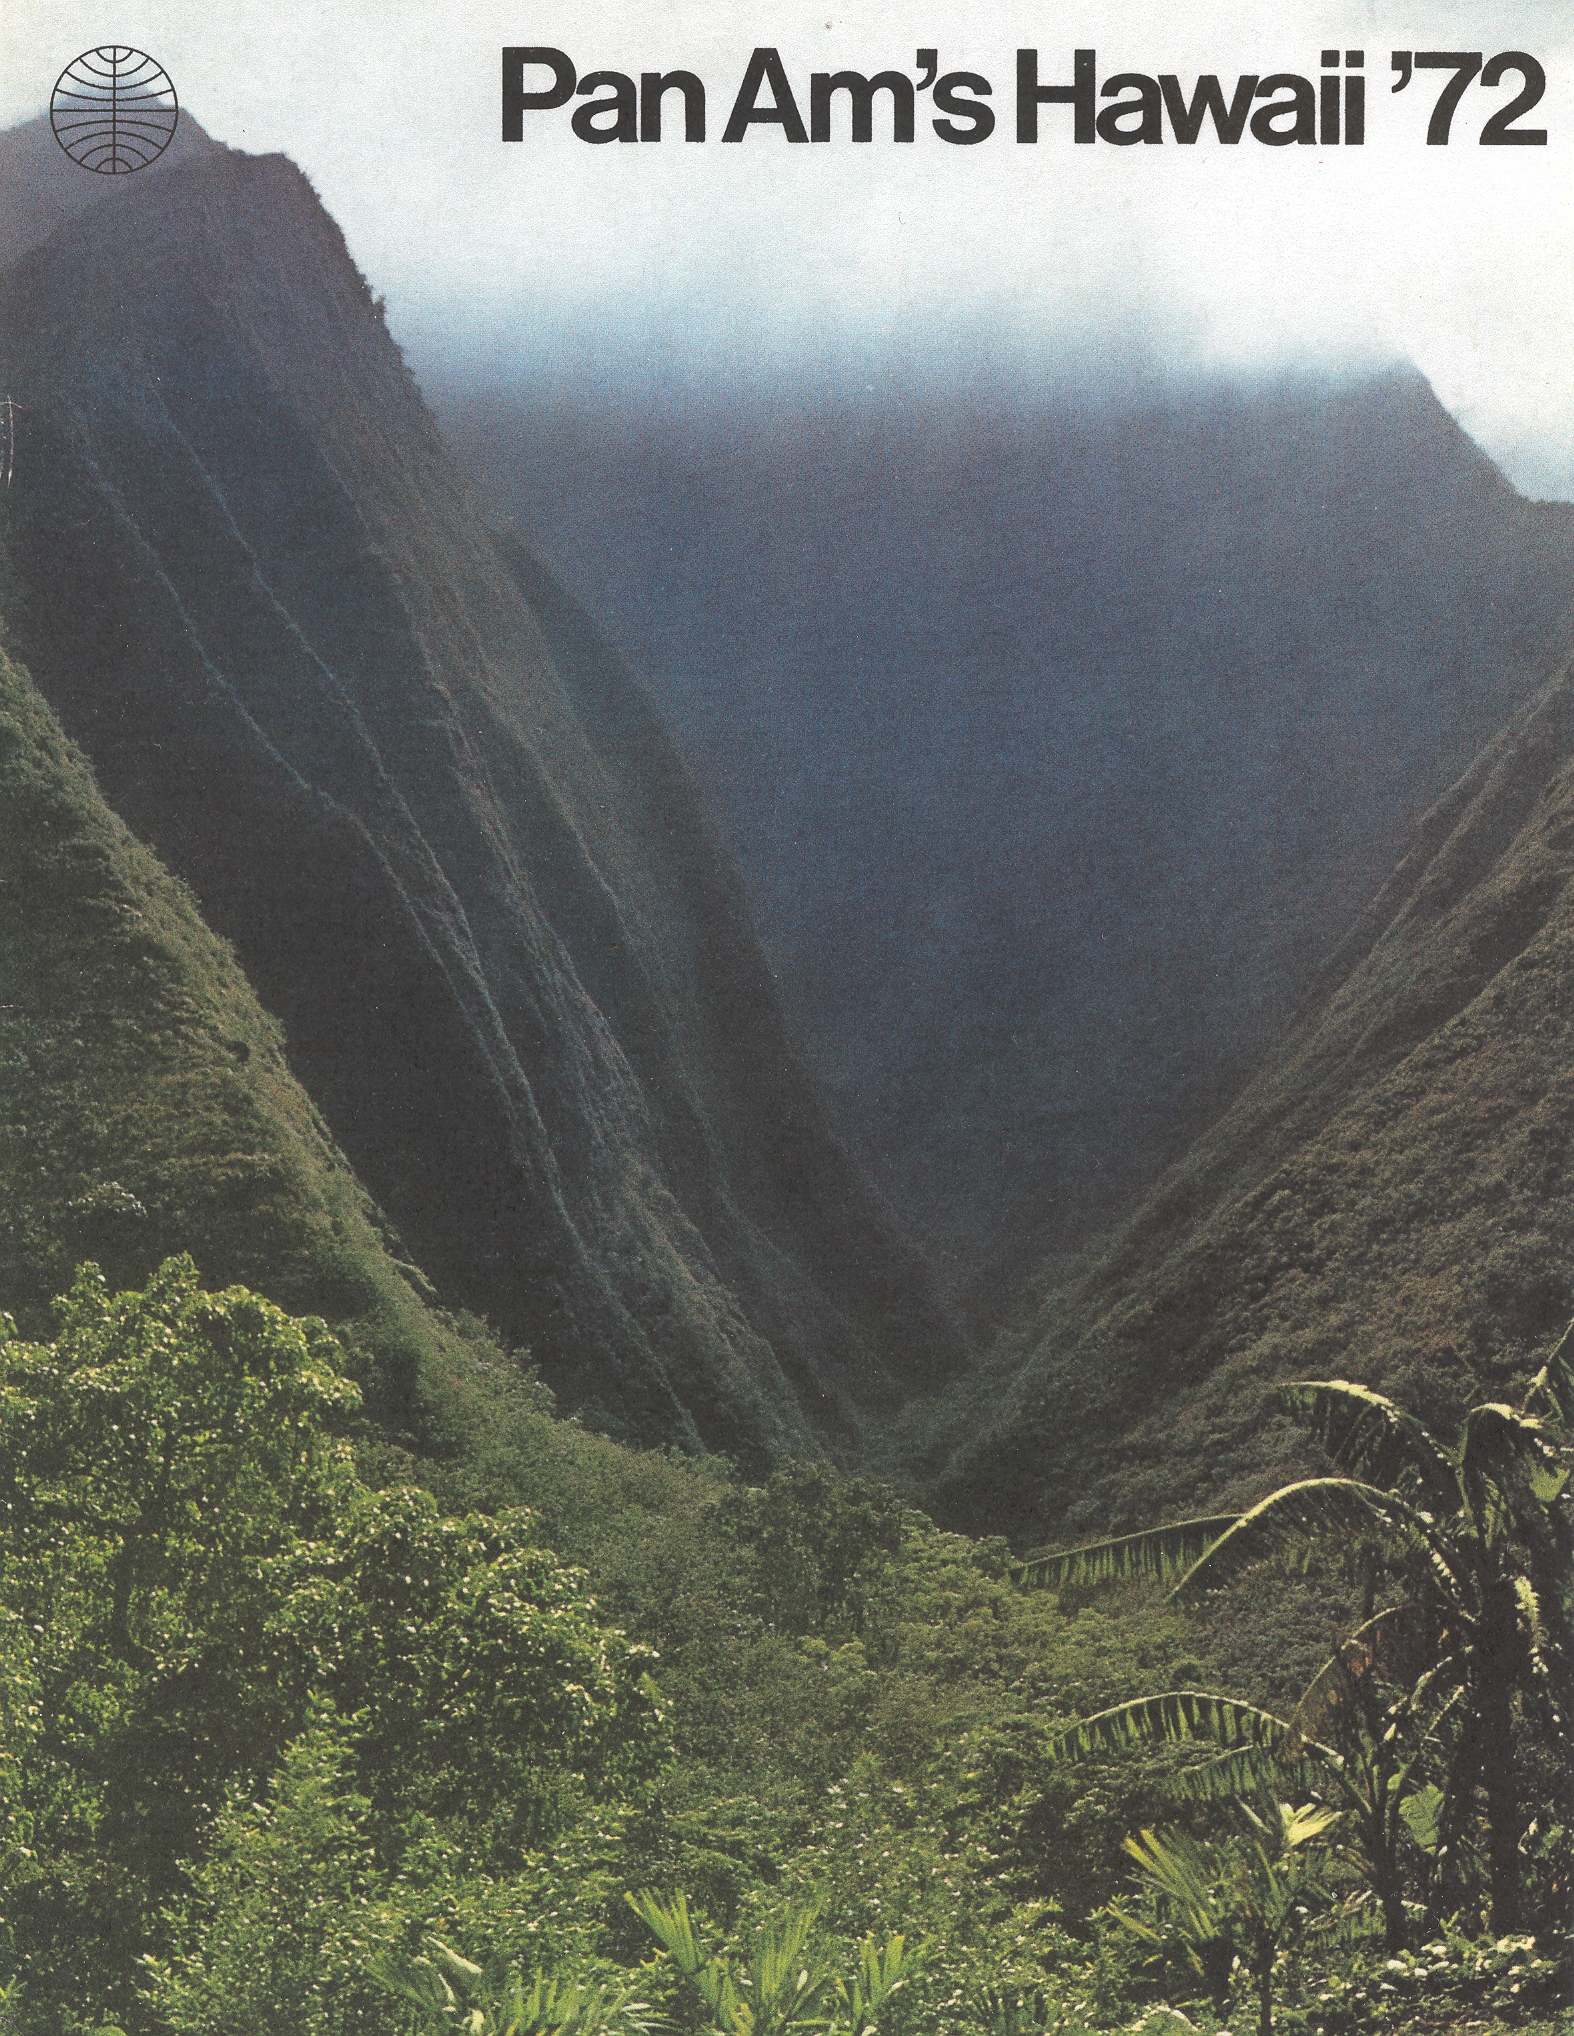 A 1972 tour brochure cover for Hawaii featuring the Helvetica style font.